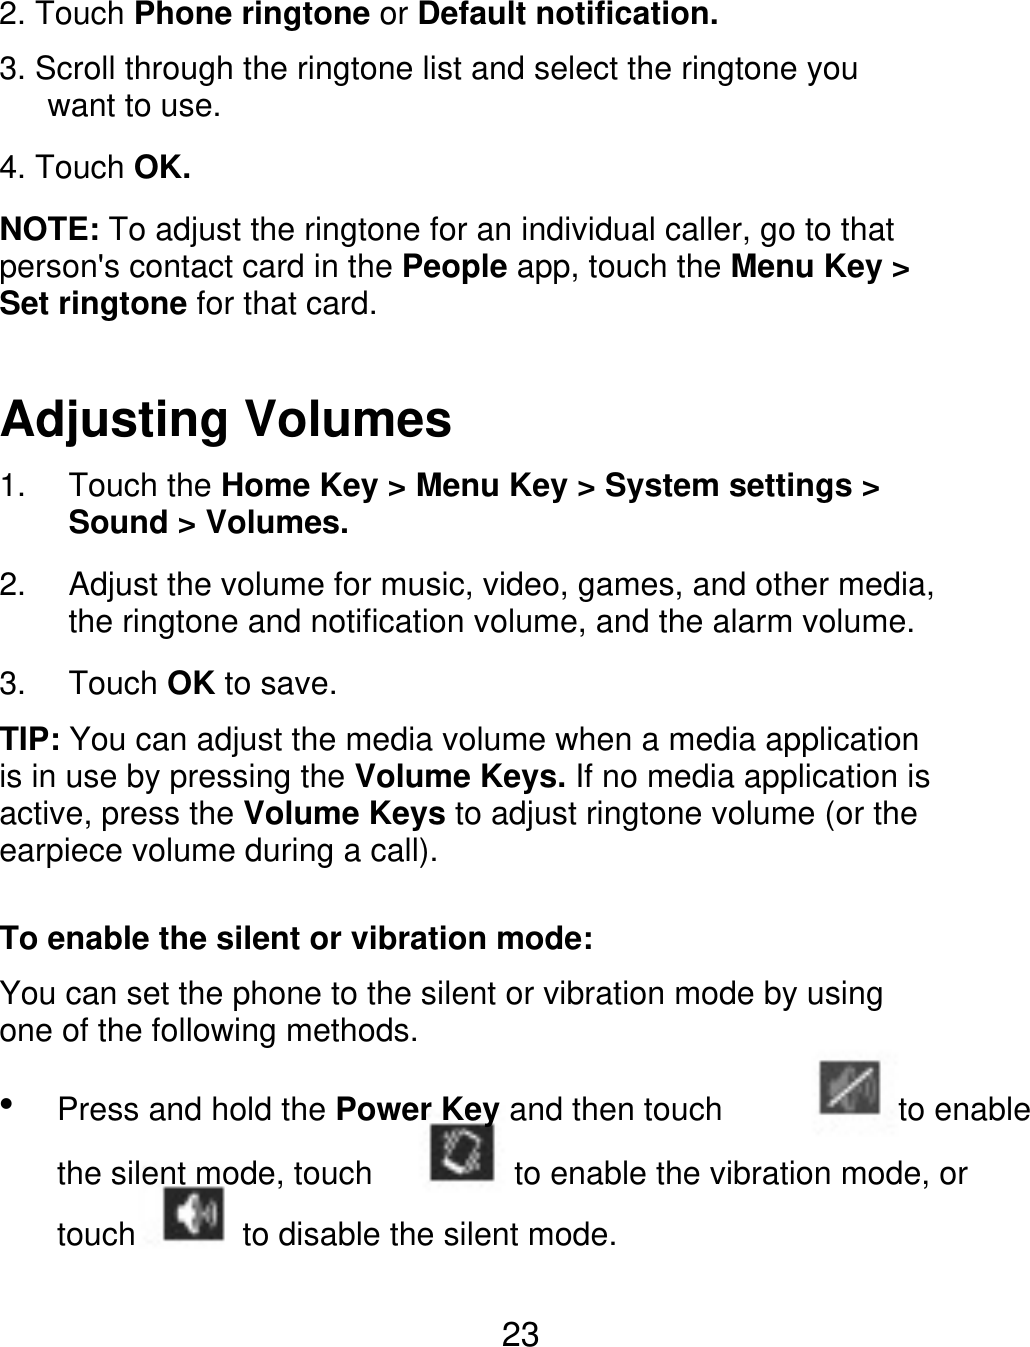 2. Touch Phone ringtone or Default notification. 3. Scroll through the ringtone list and select the ringtone you    want to use. 4. Touch OK. NOTE: To adjust the ringtone for an individual caller, go to that person&apos;s contact card in the People app, touch the Menu Key &gt; Set ringtone for that card. Adjusting Volumes 1. 2. 3. Touch the Home Key &gt; Menu Key &gt; System settings &gt; Sound &gt; Volumes. Adjust the volume for music, video, games, and other media, the ringtone and notification volume, and the alarm volume. Touch OK to save. TIP: You can adjust the media volume when a media application is in use by pressing the Volume Keys. If no media application is active, press the Volume Keys to adjust ringtone volume (or the earpiece volume during a call). To enable the silent or vibration mode: You can set the phone to the silent or vibration mode by using one of the following methods.  Press and hold the Power Key and then touch the silent mode, touch touch to enable to enable the vibration mode, or to disable the silent mode. 23 